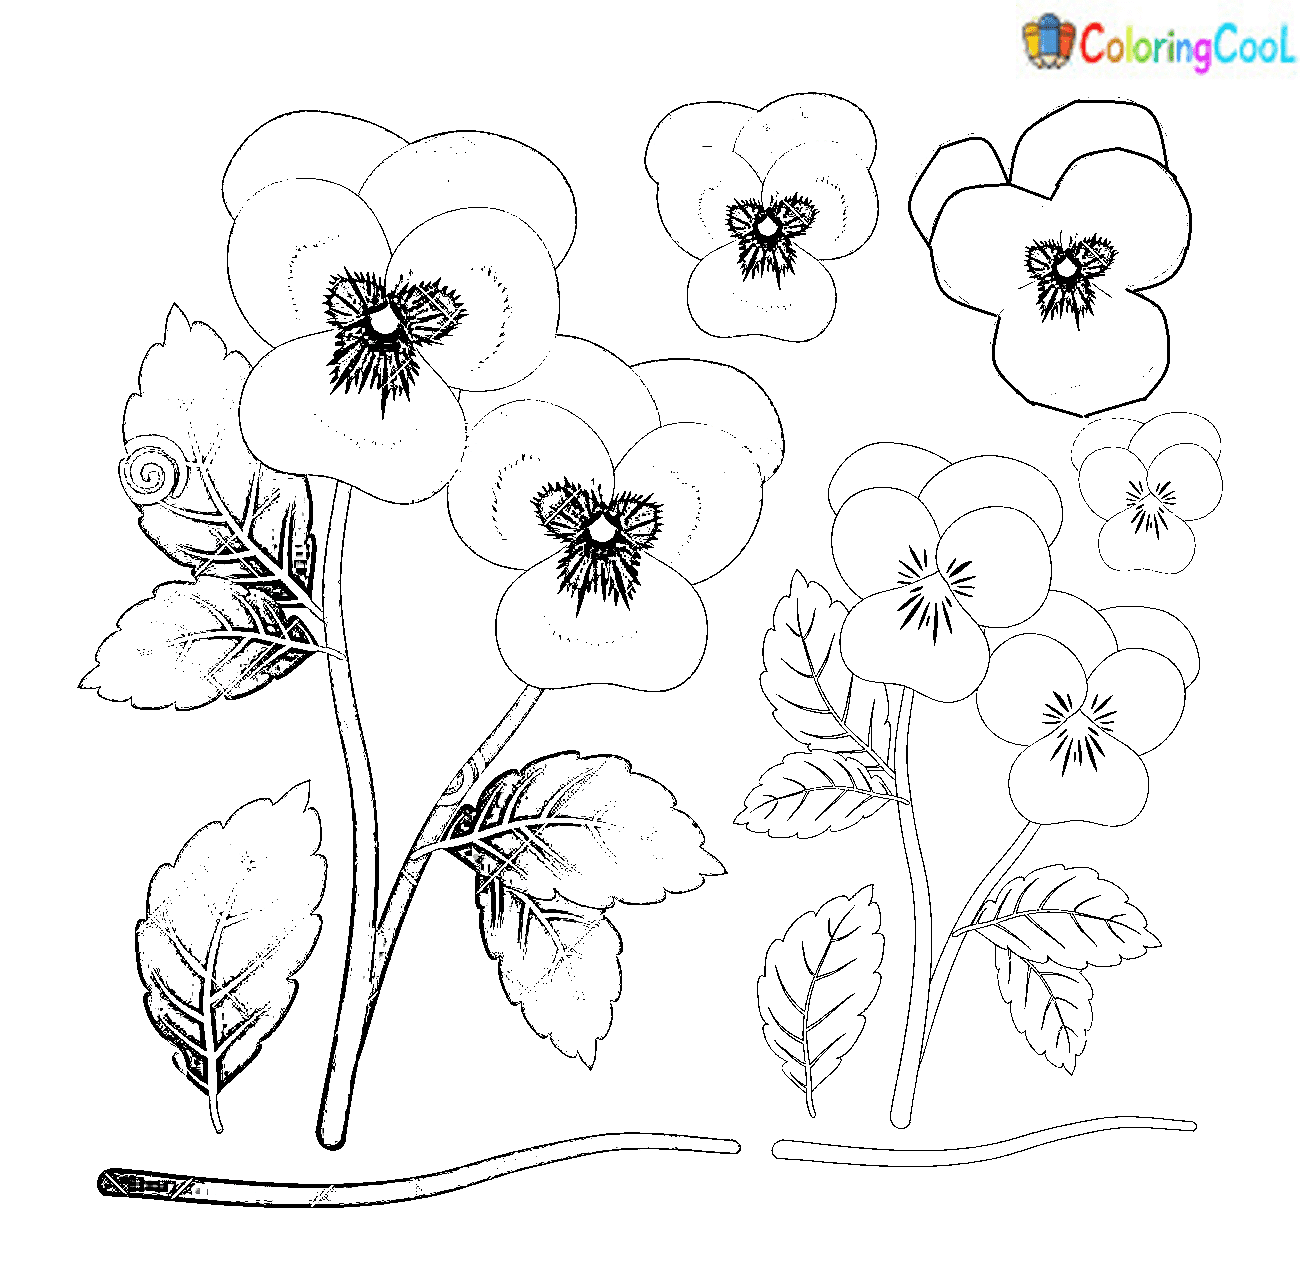 Image Pansy Free Coloring Page